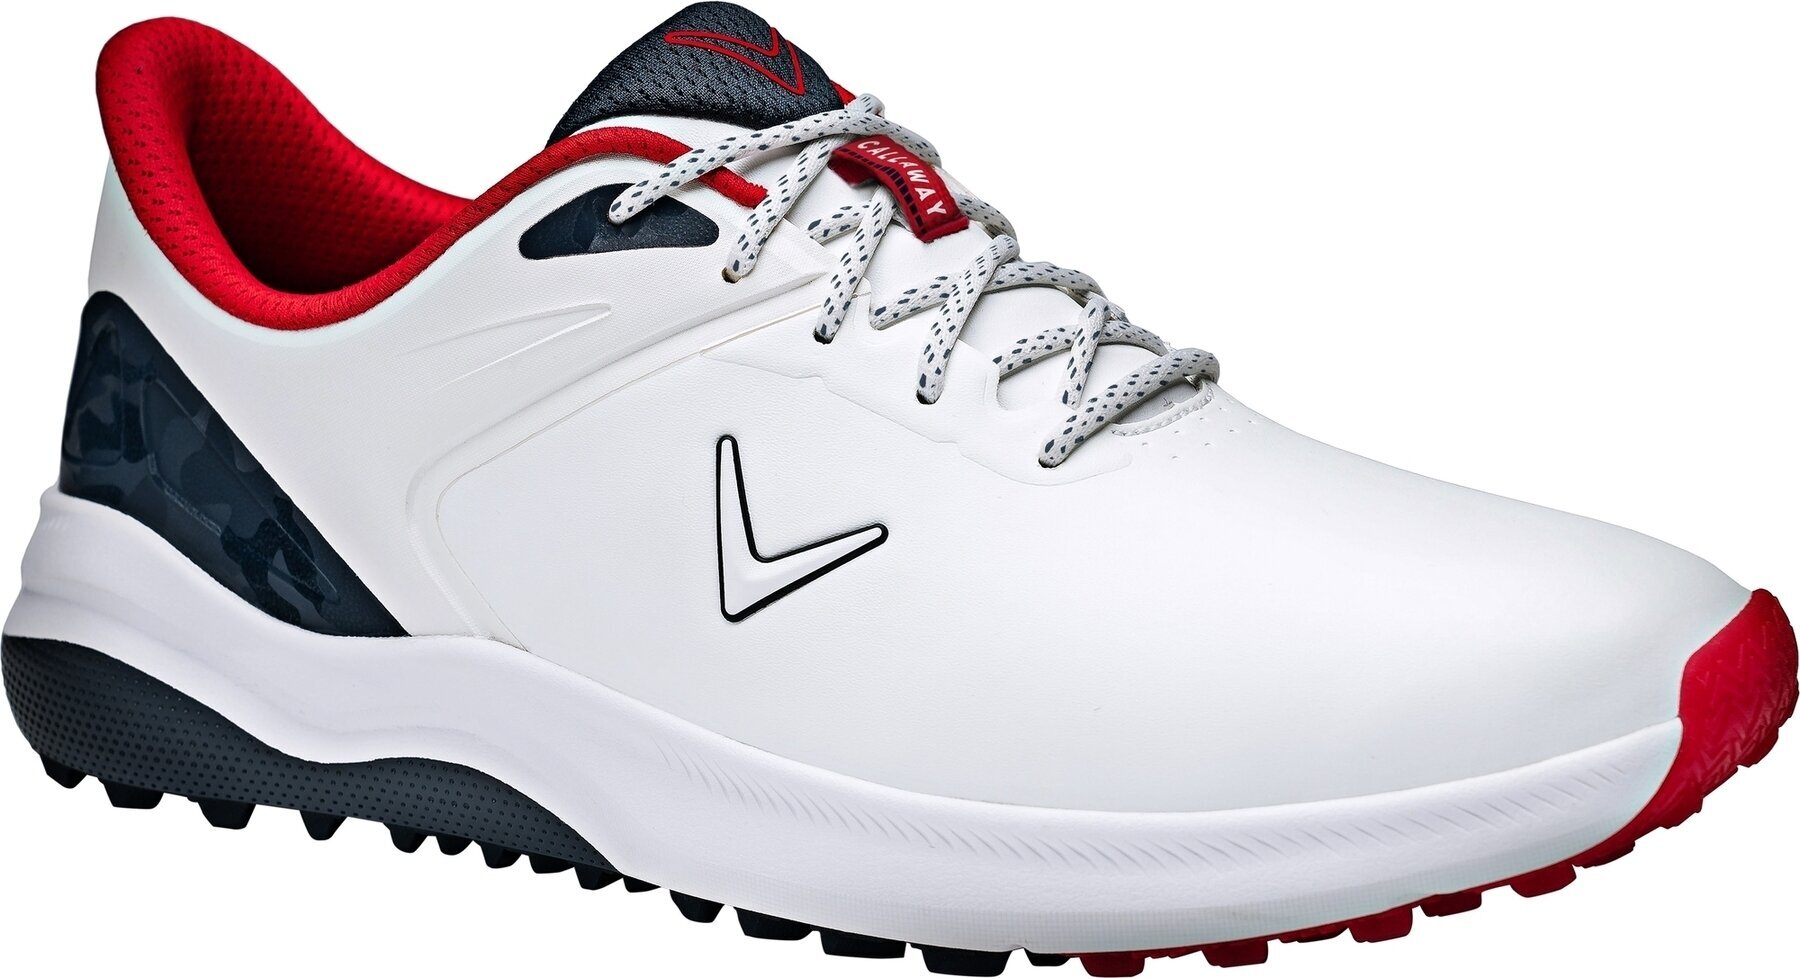 Men's golf shoes Callaway Lazer Mens Golf Shoes White/Navy/Red 47